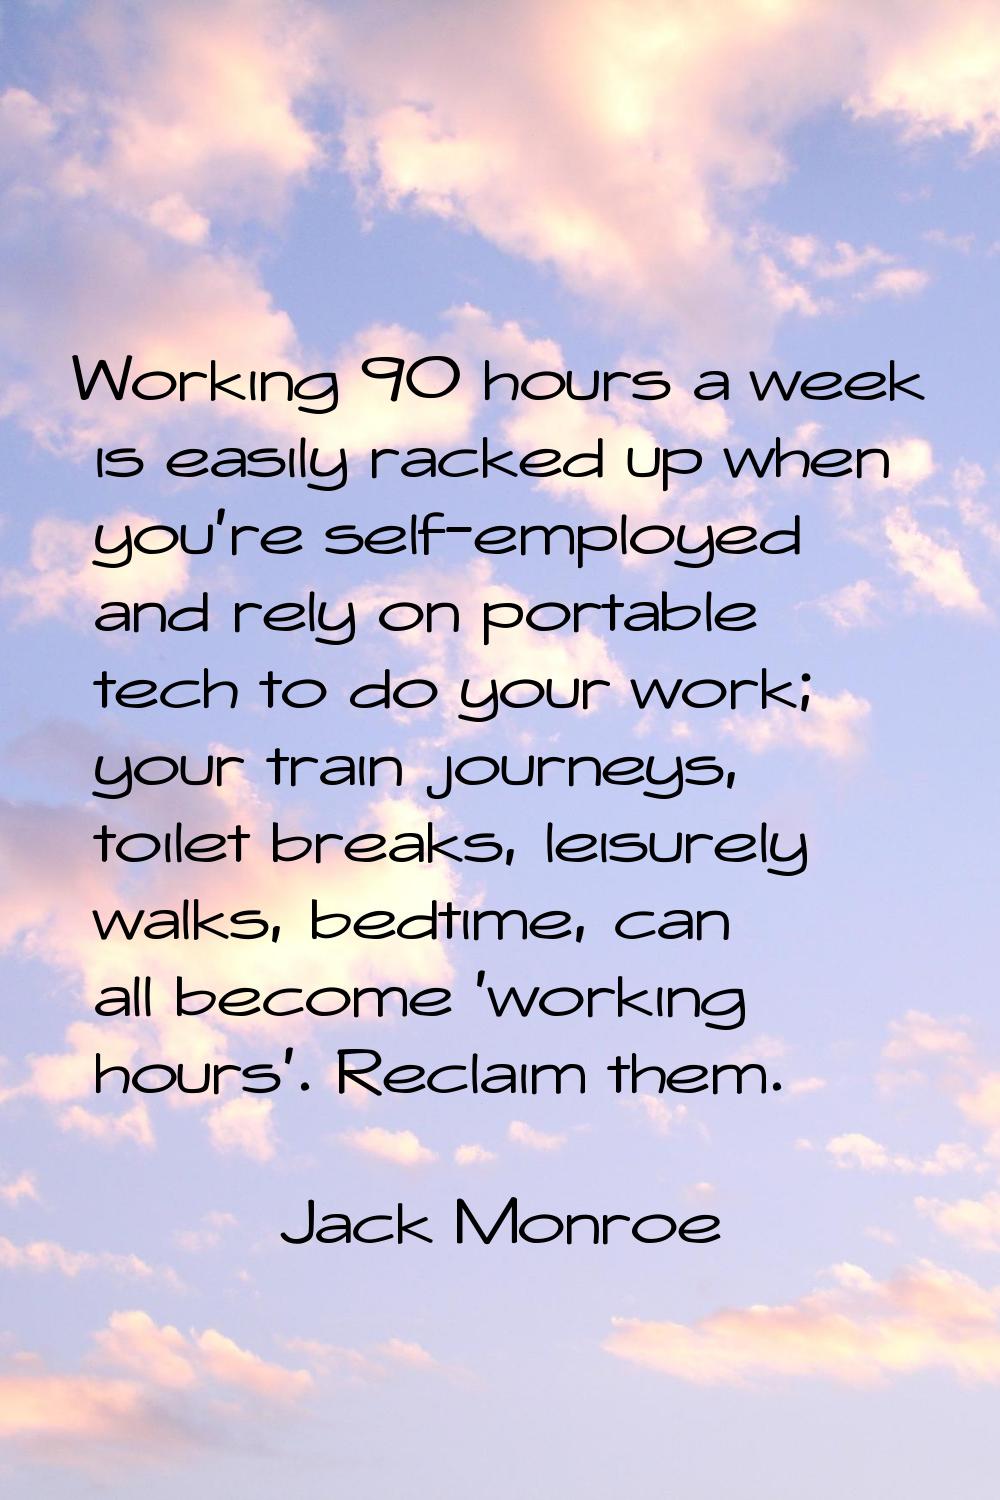 Working 90 hours a week is easily racked up when you're self-employed and rely on portable tech to 